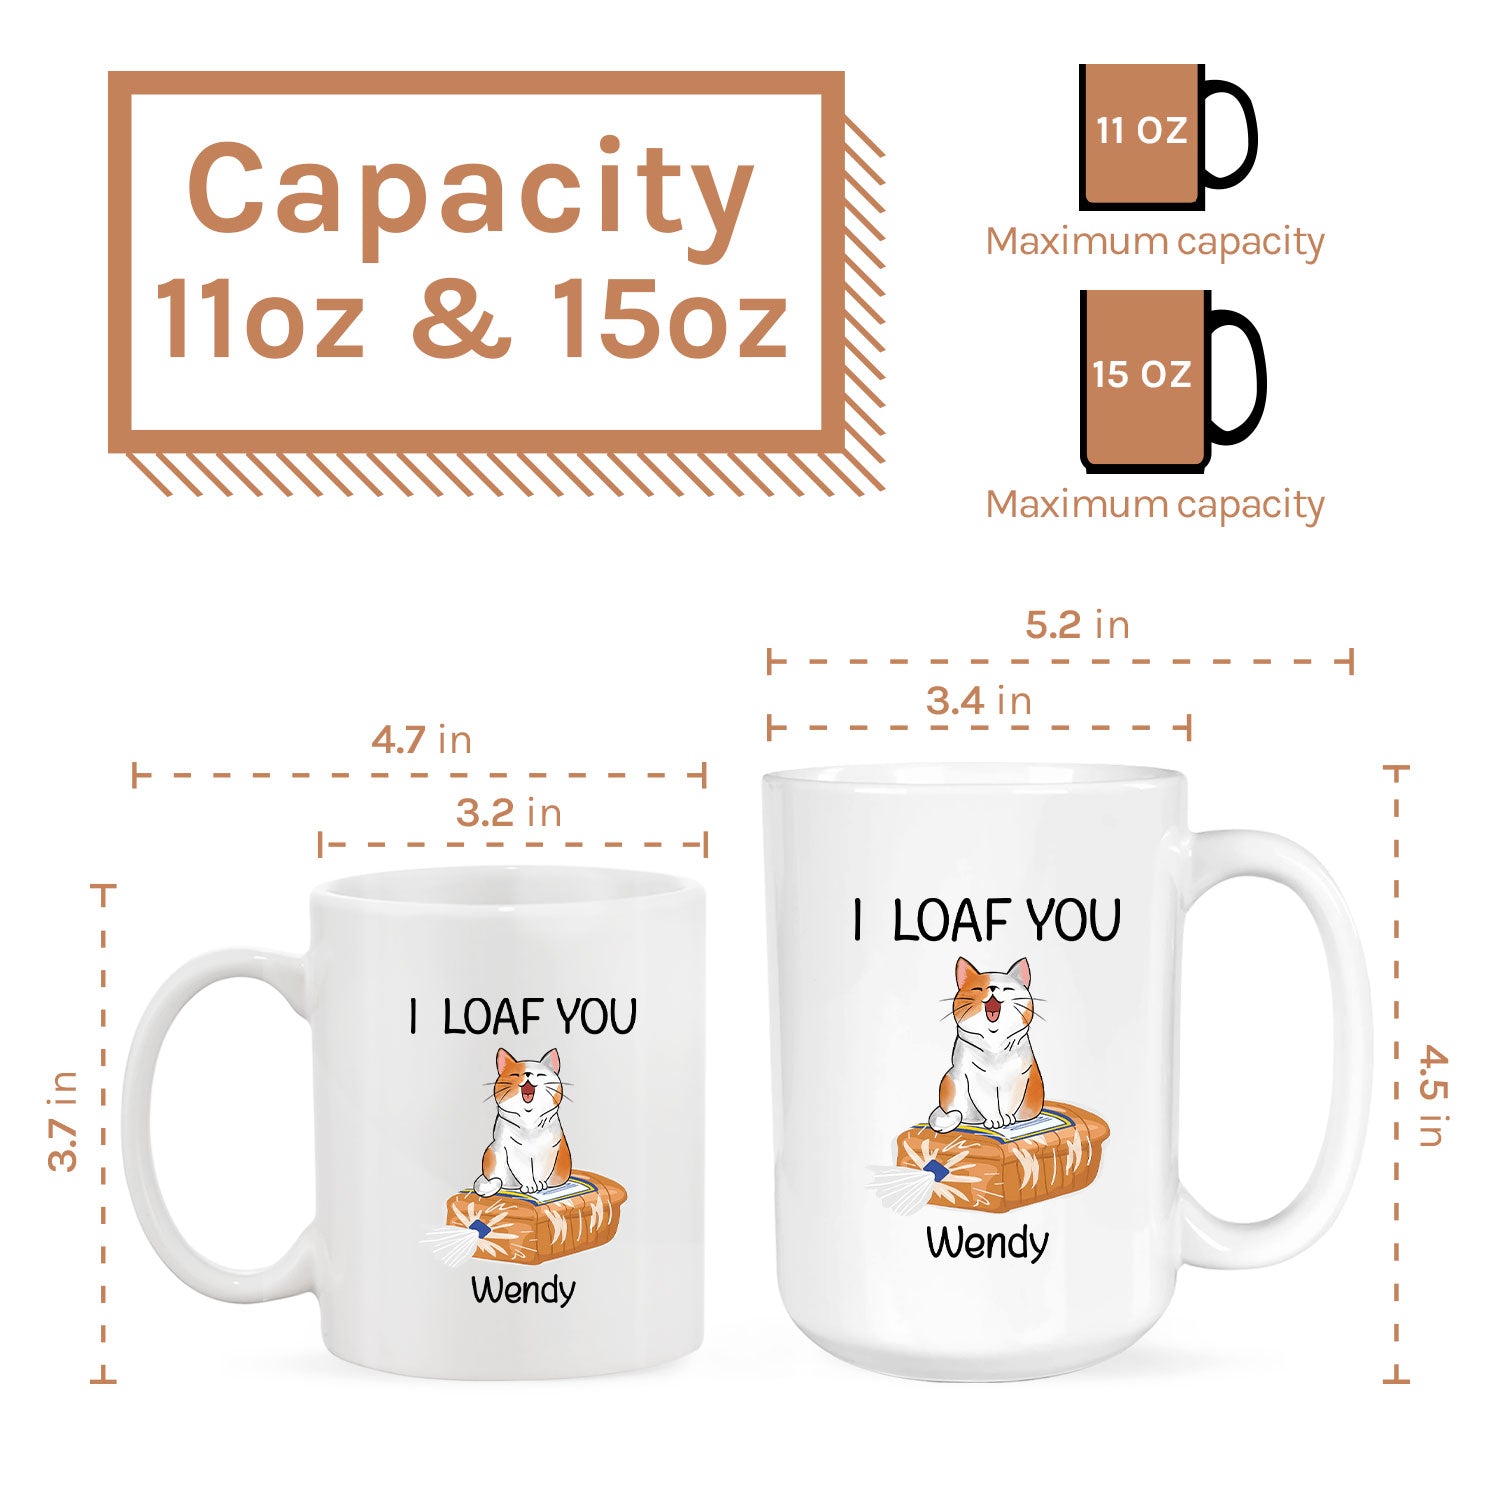 I Loaf You - Personalized Anniversary or Valentine's Day gift for Boyfriend or Girlfriend - Custom Mug - MyMindfulGifts